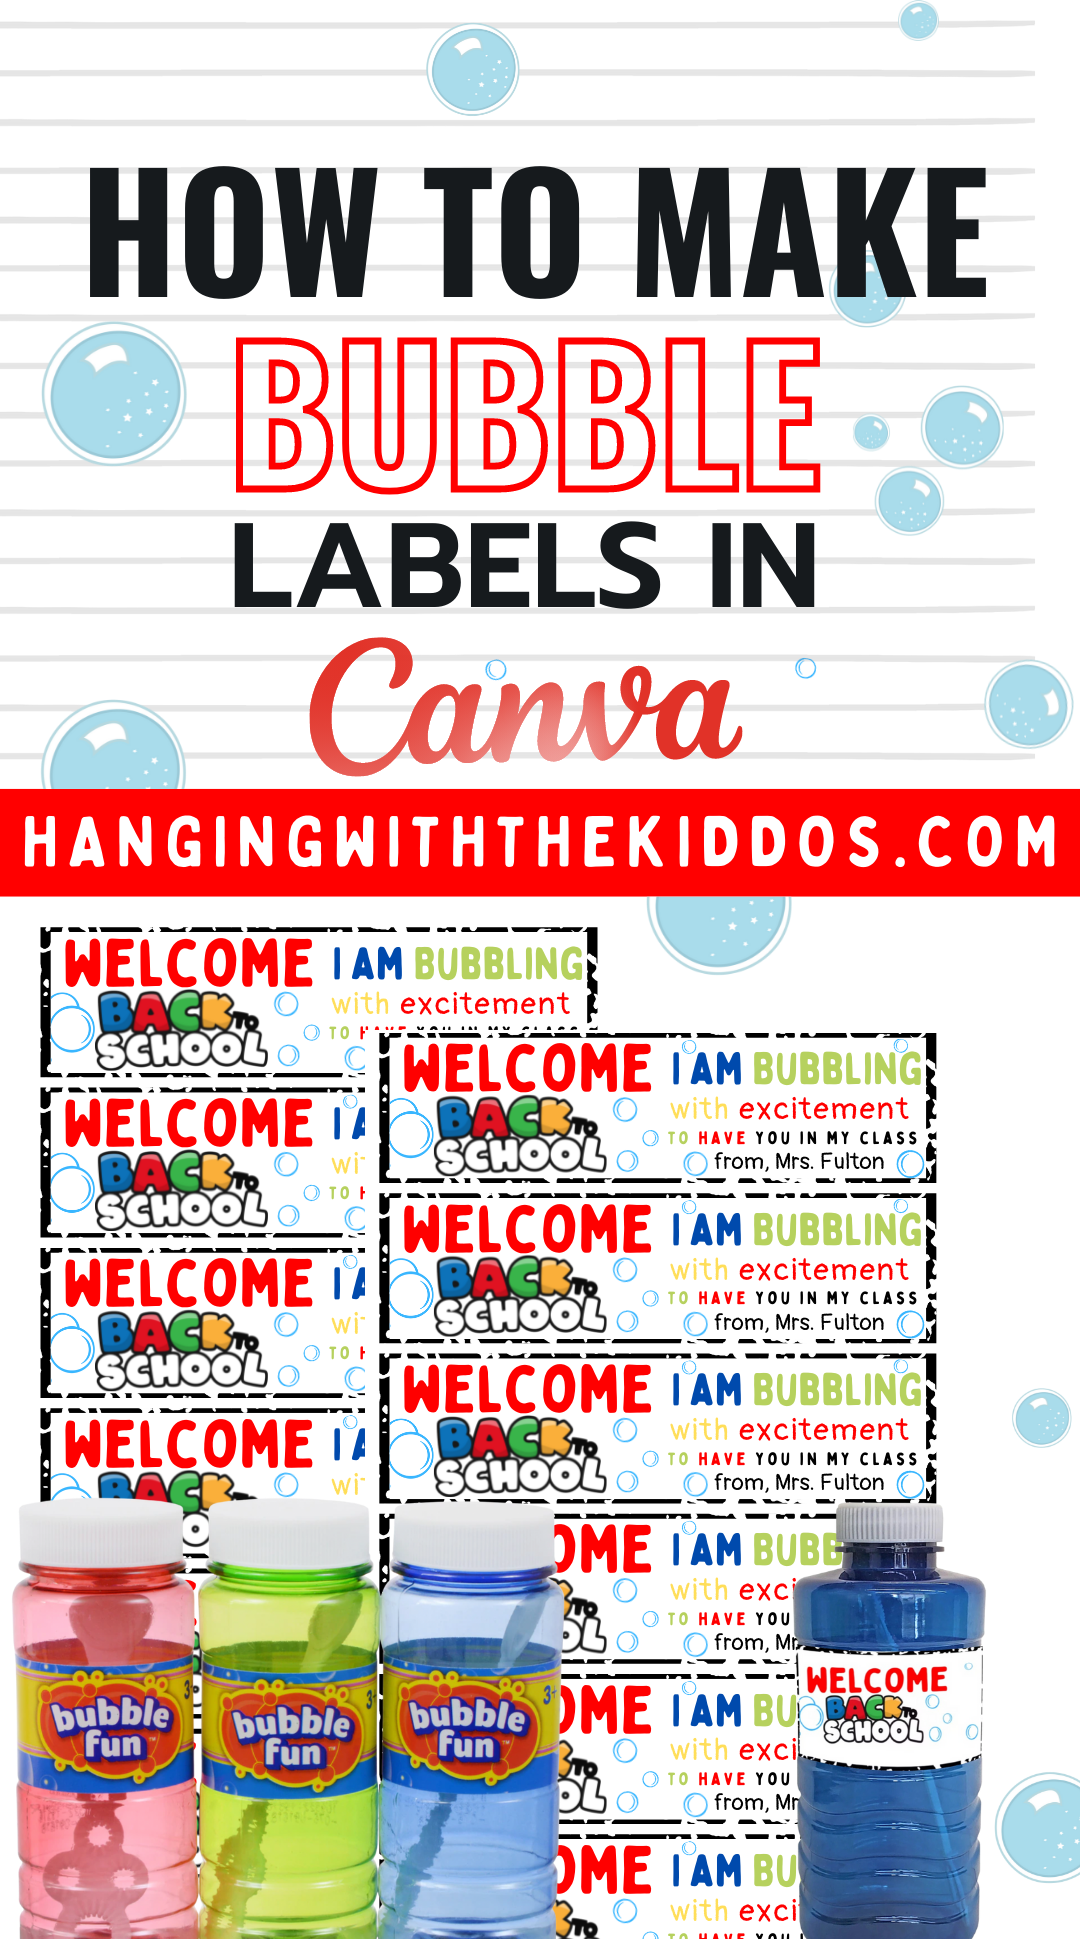 HOW TO MAKE BUBBLE LABELS